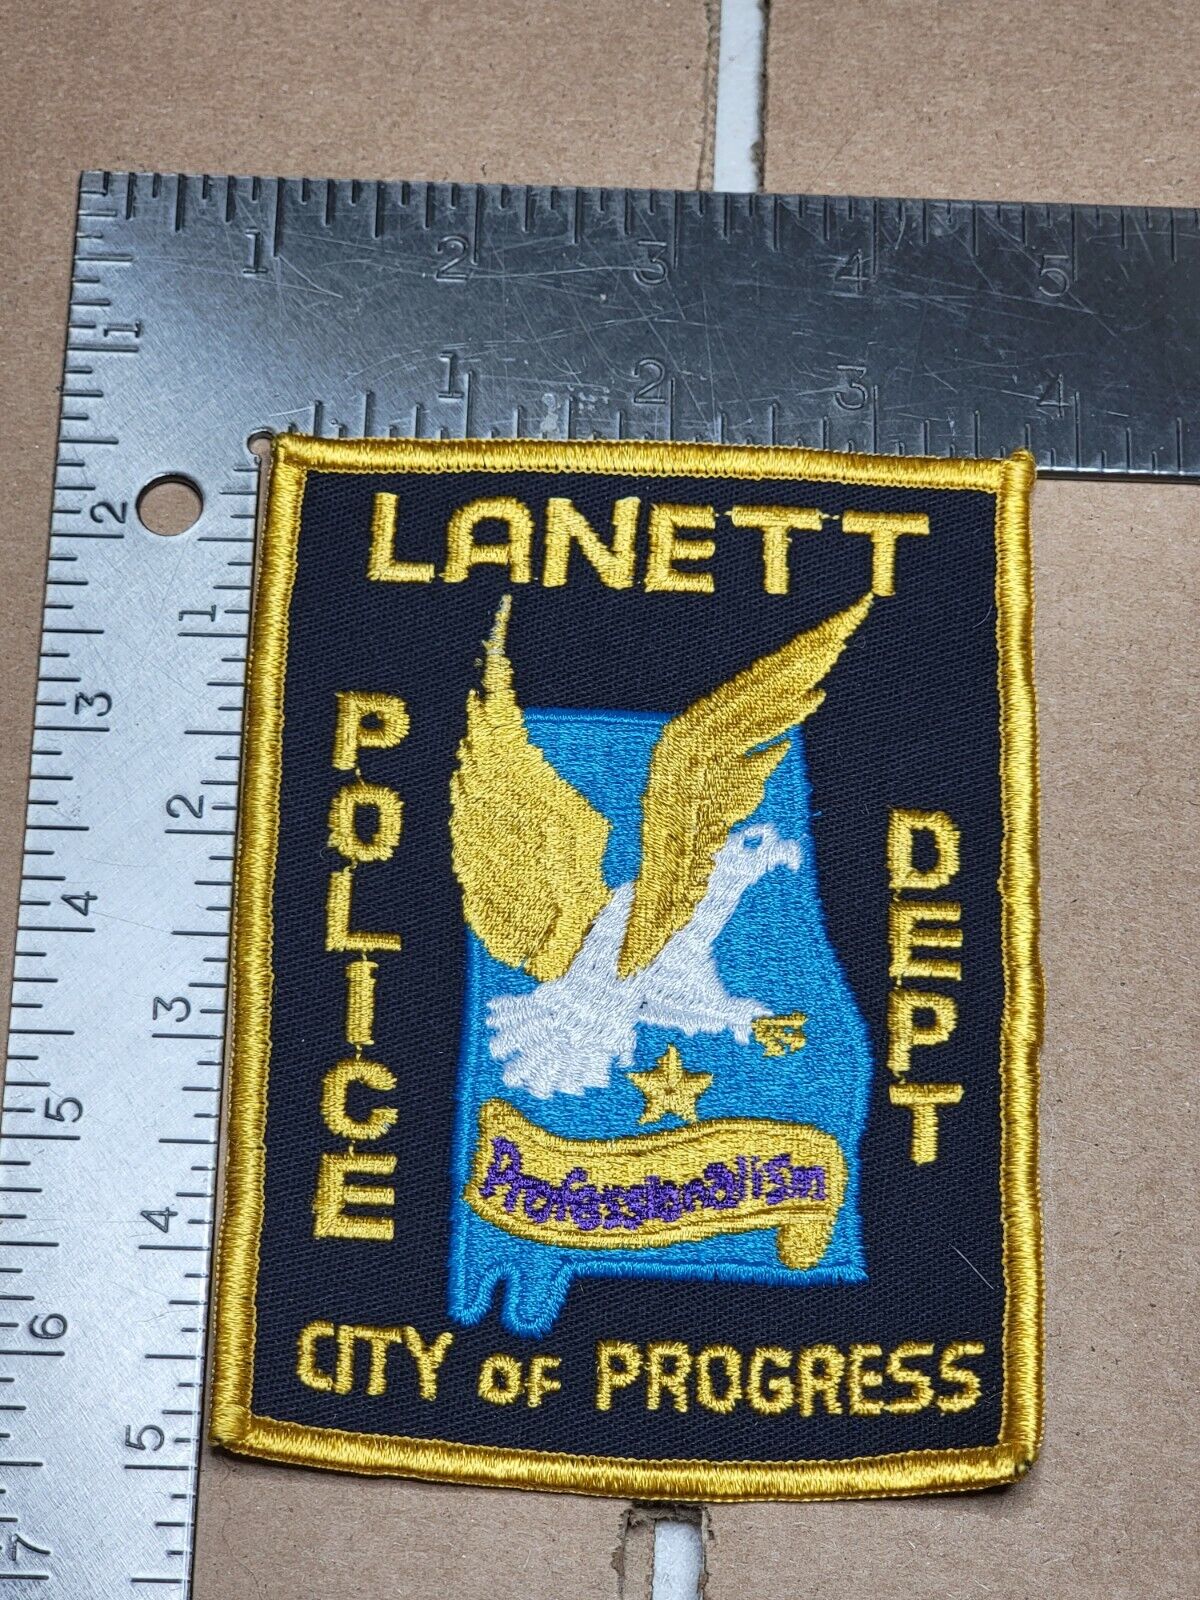 S Police patch patches Lanett Alabama